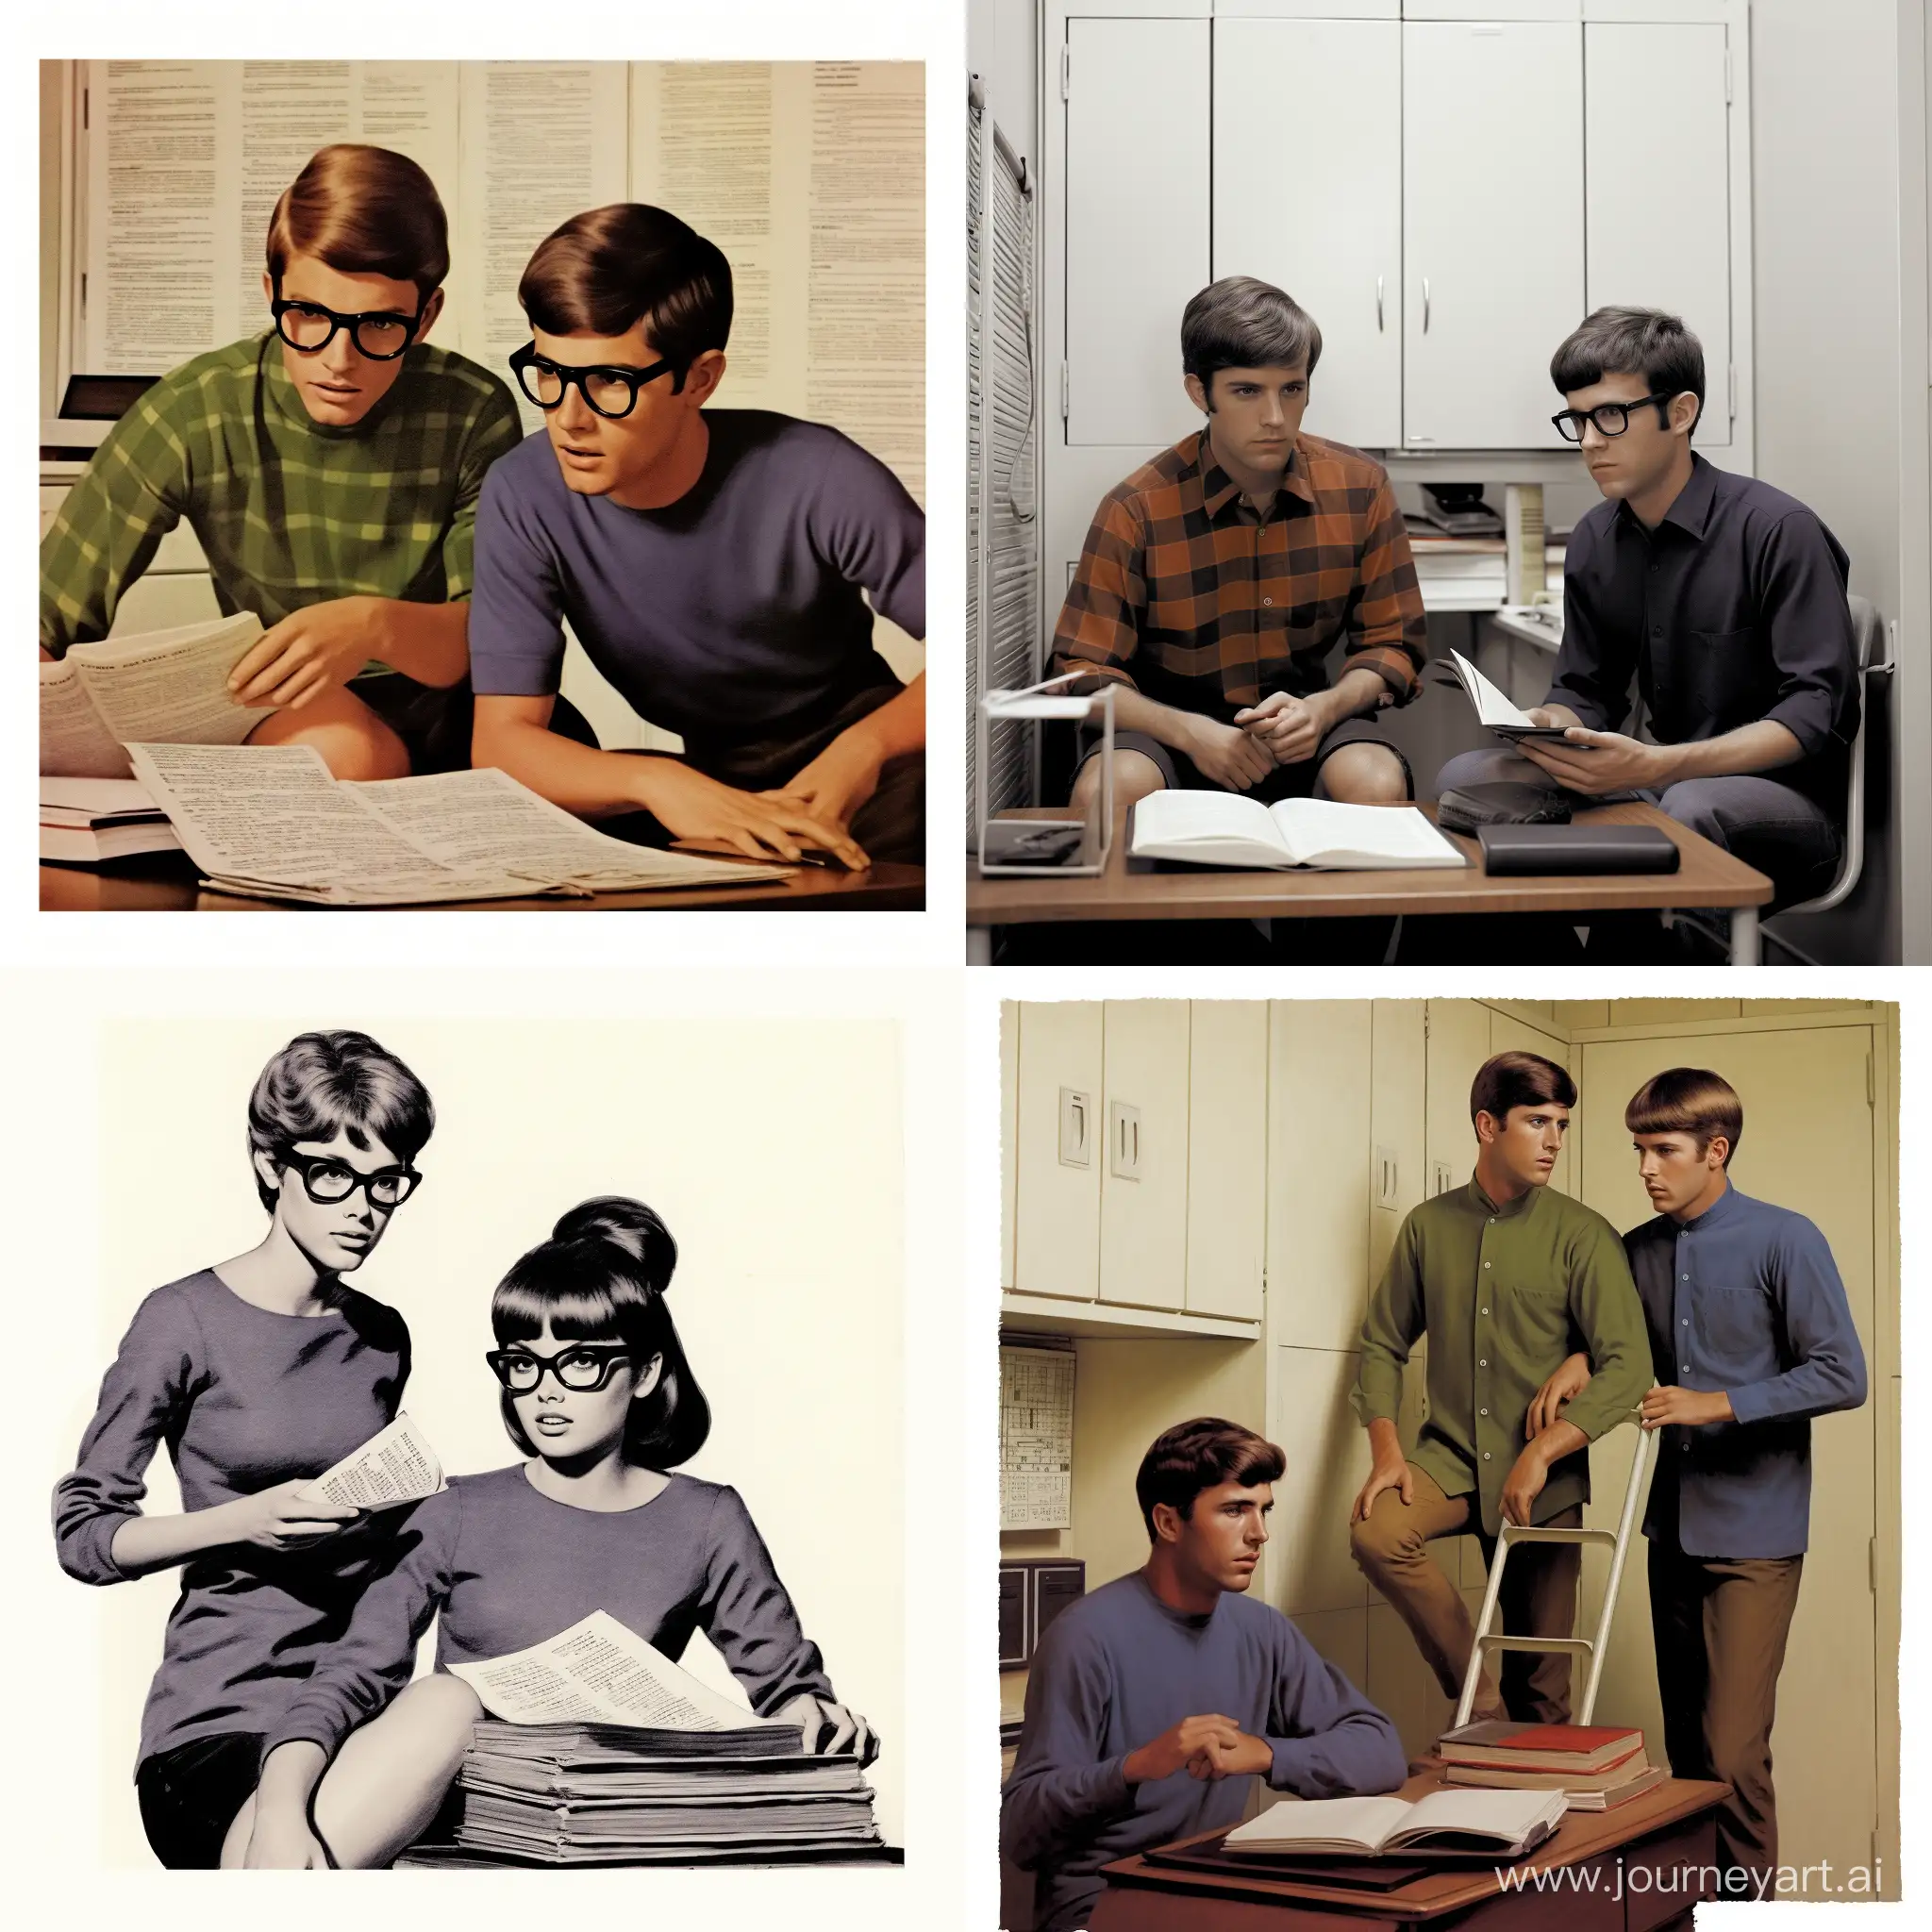 1960s-College-Dorm-Study-Session-for-Two-Male-Students